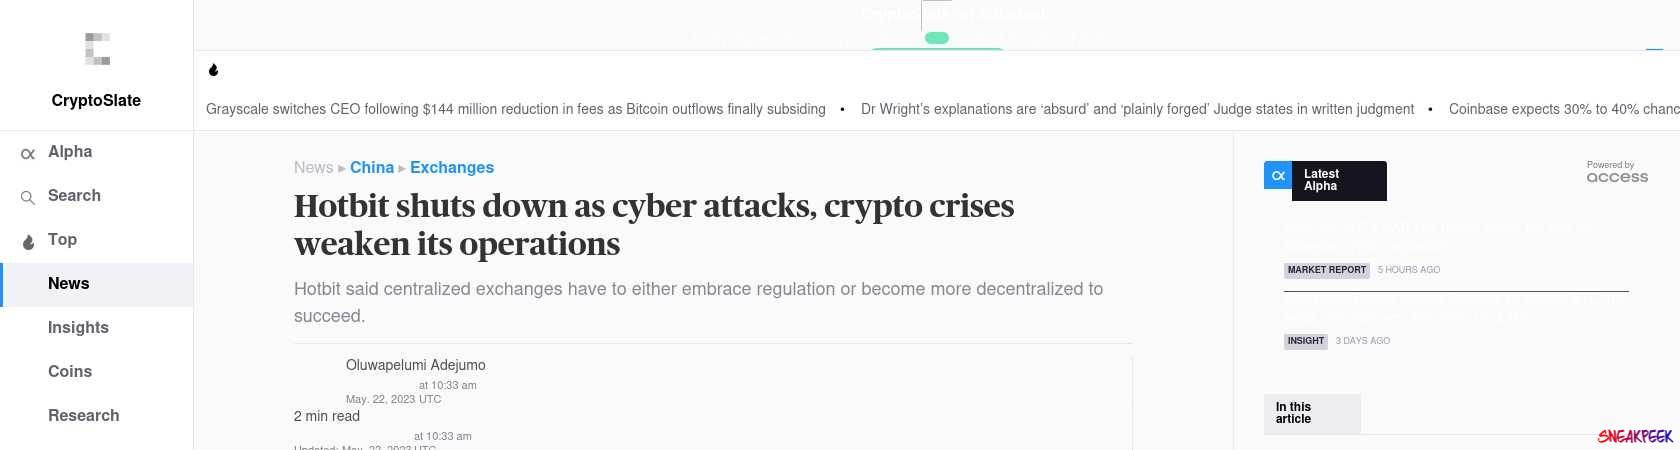 Read the full Article:  ⭲ Hotbit shuts down as cyber attacks, crypto crises weaken its operations